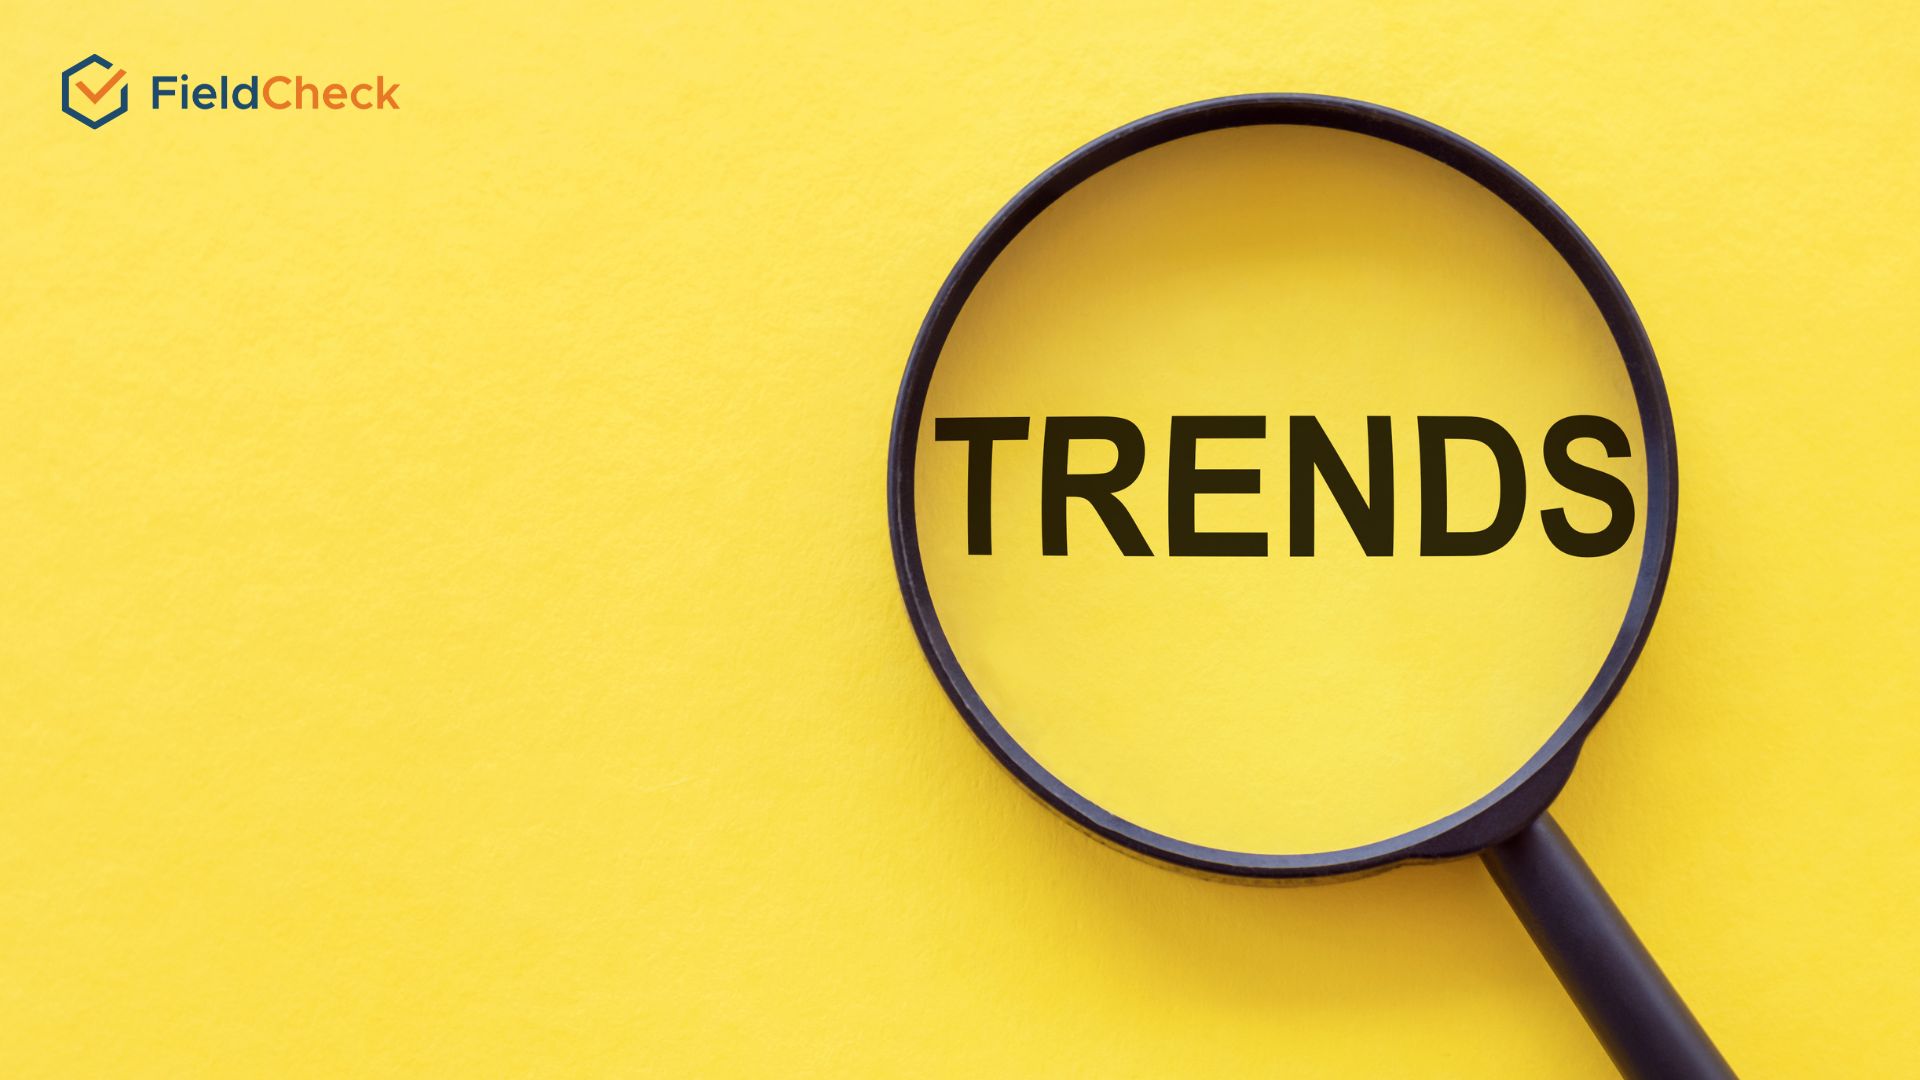 What Are The Recent Operations Management Trends In 2022?